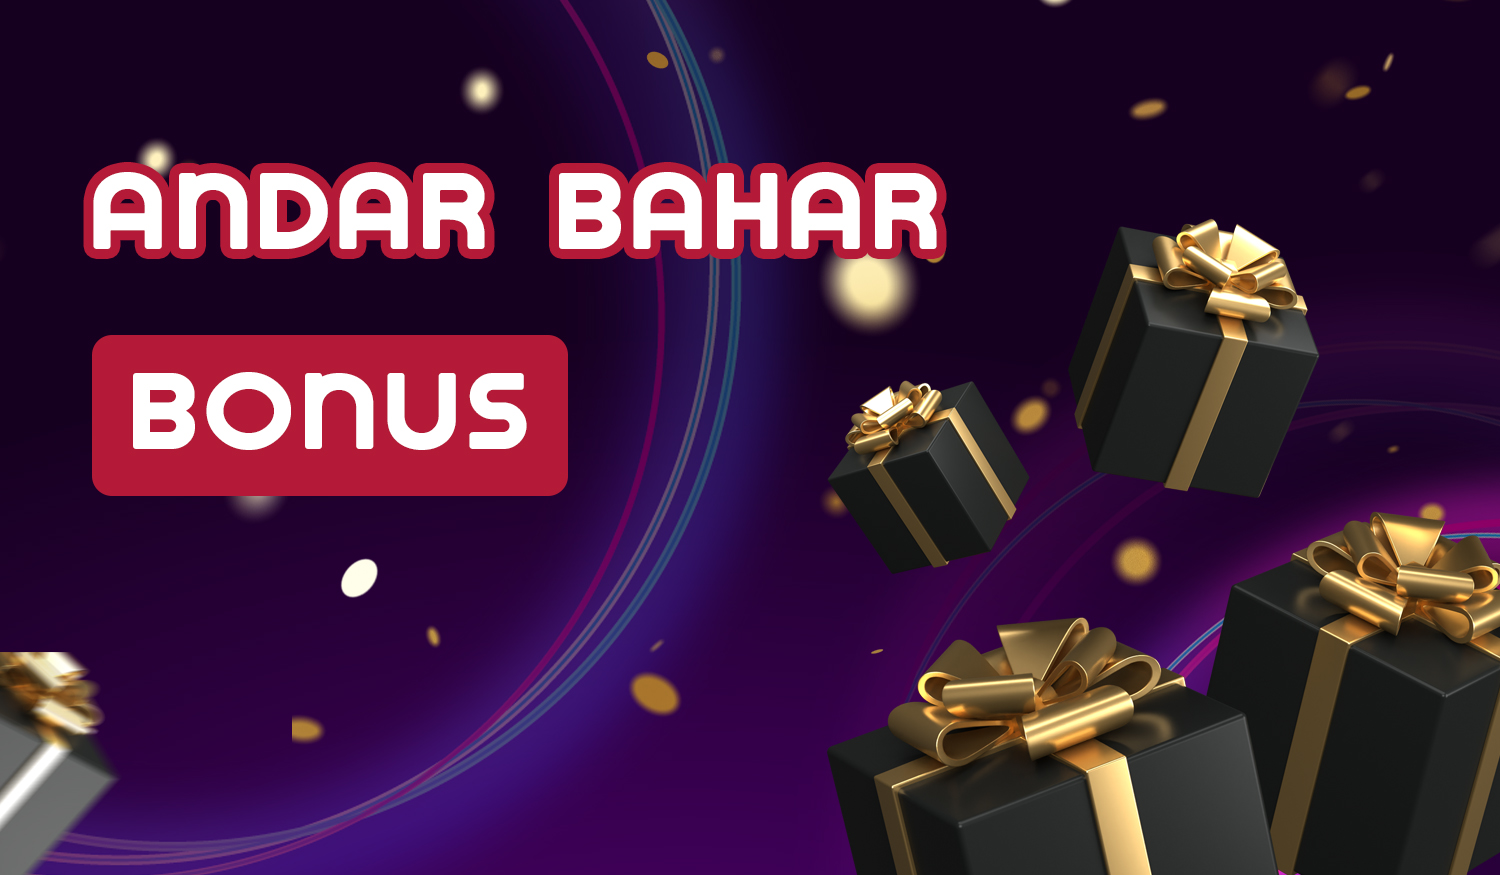 What bonus Parimatch offer for Indian users to play Andar Bahar? 